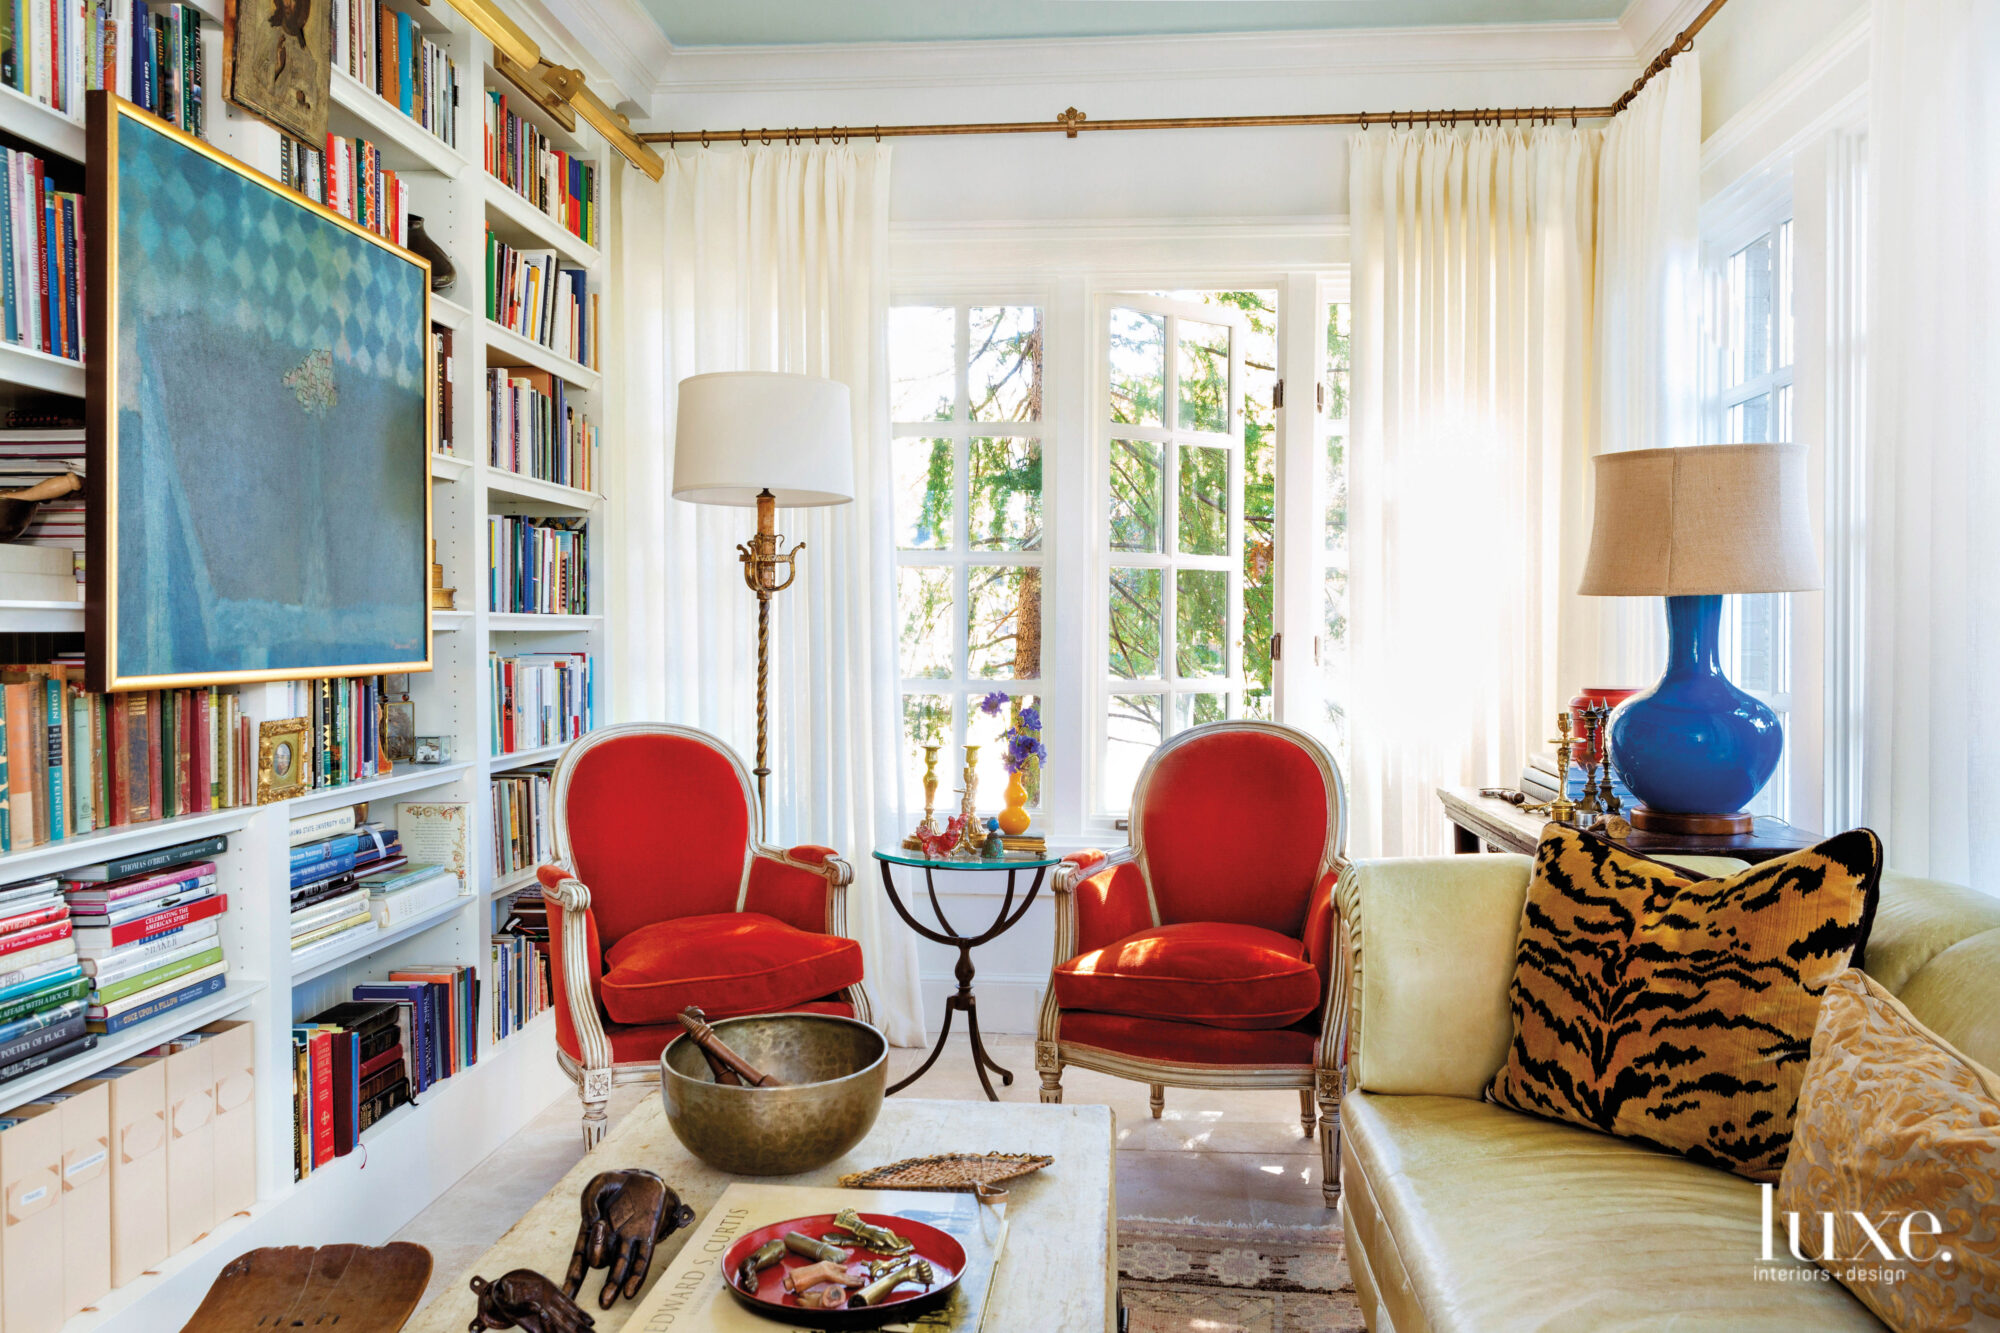 Small living room with built-in bookshelves, red armchairs and open French doors